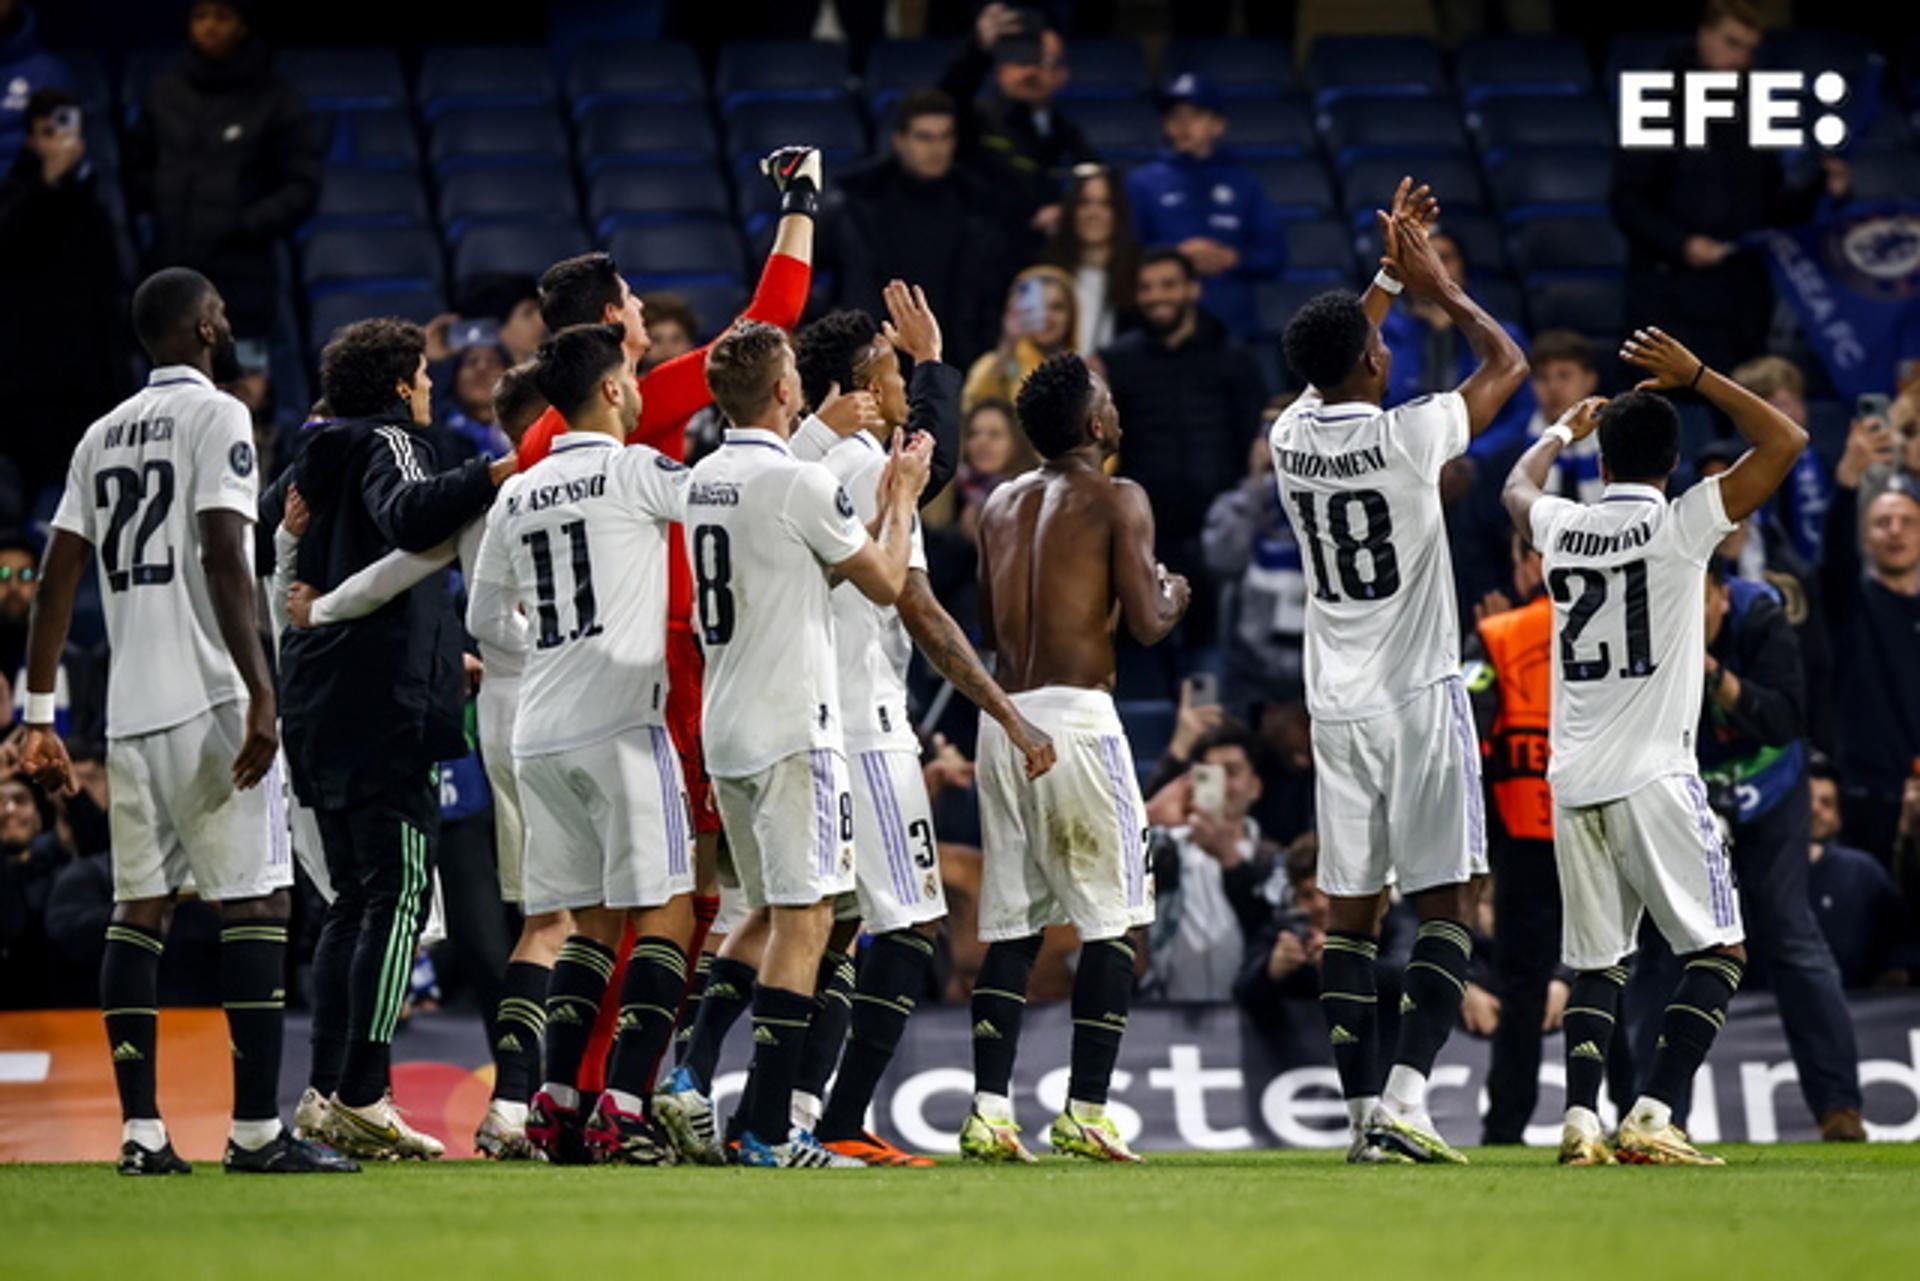 Real Madrid players celebrate after defeating Chelsea in the UEFA Champions League quarterfinal in London on 18 April 2023. EFE/EPA/TOLGA AKMEN
